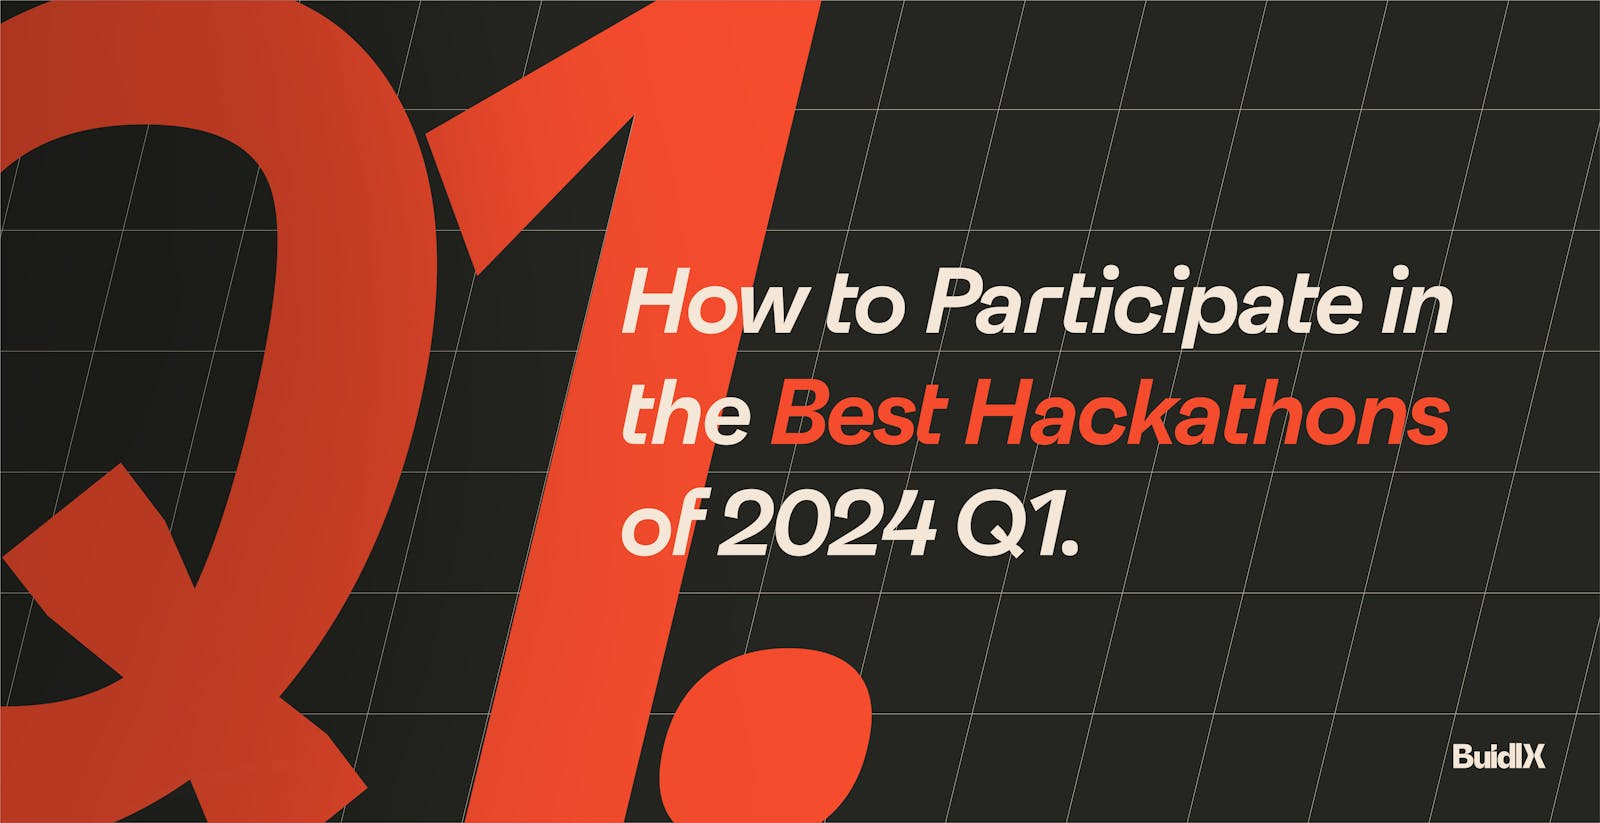 How to Participate in the Best Hackathons of 2024 Q1